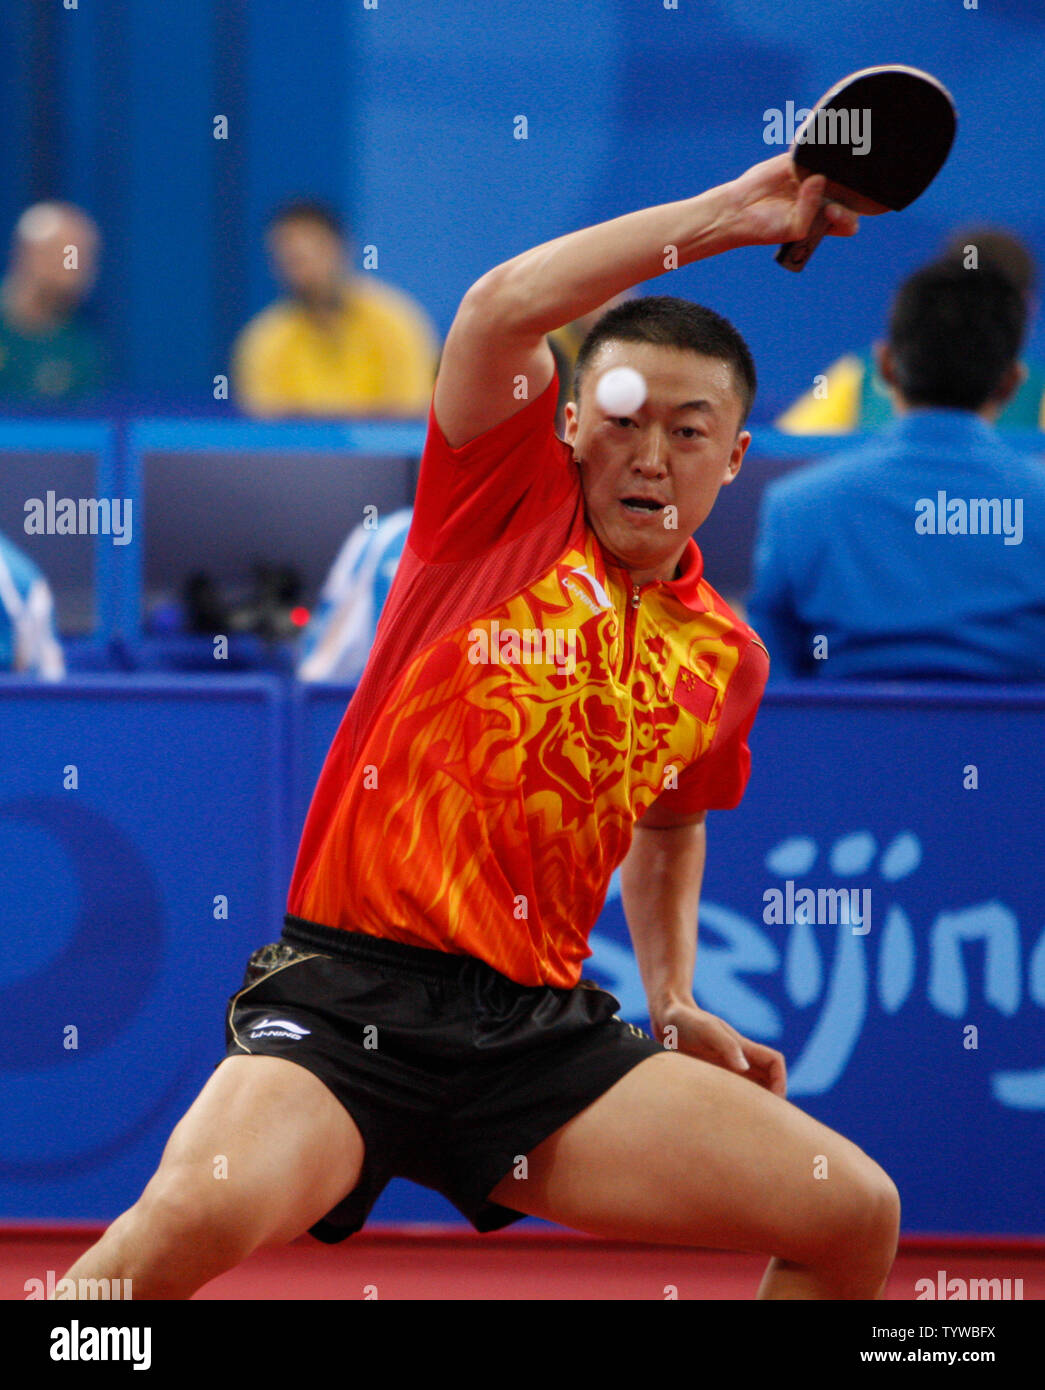 Ma Lin of China volleys with Panagiotis Gionis of Greece in the first round of Table Tennis eliminations in Beijing on August 13, 2008. Lin defeated Gionis.  (UPI Photo/Terry Schmitt) Stock Photo